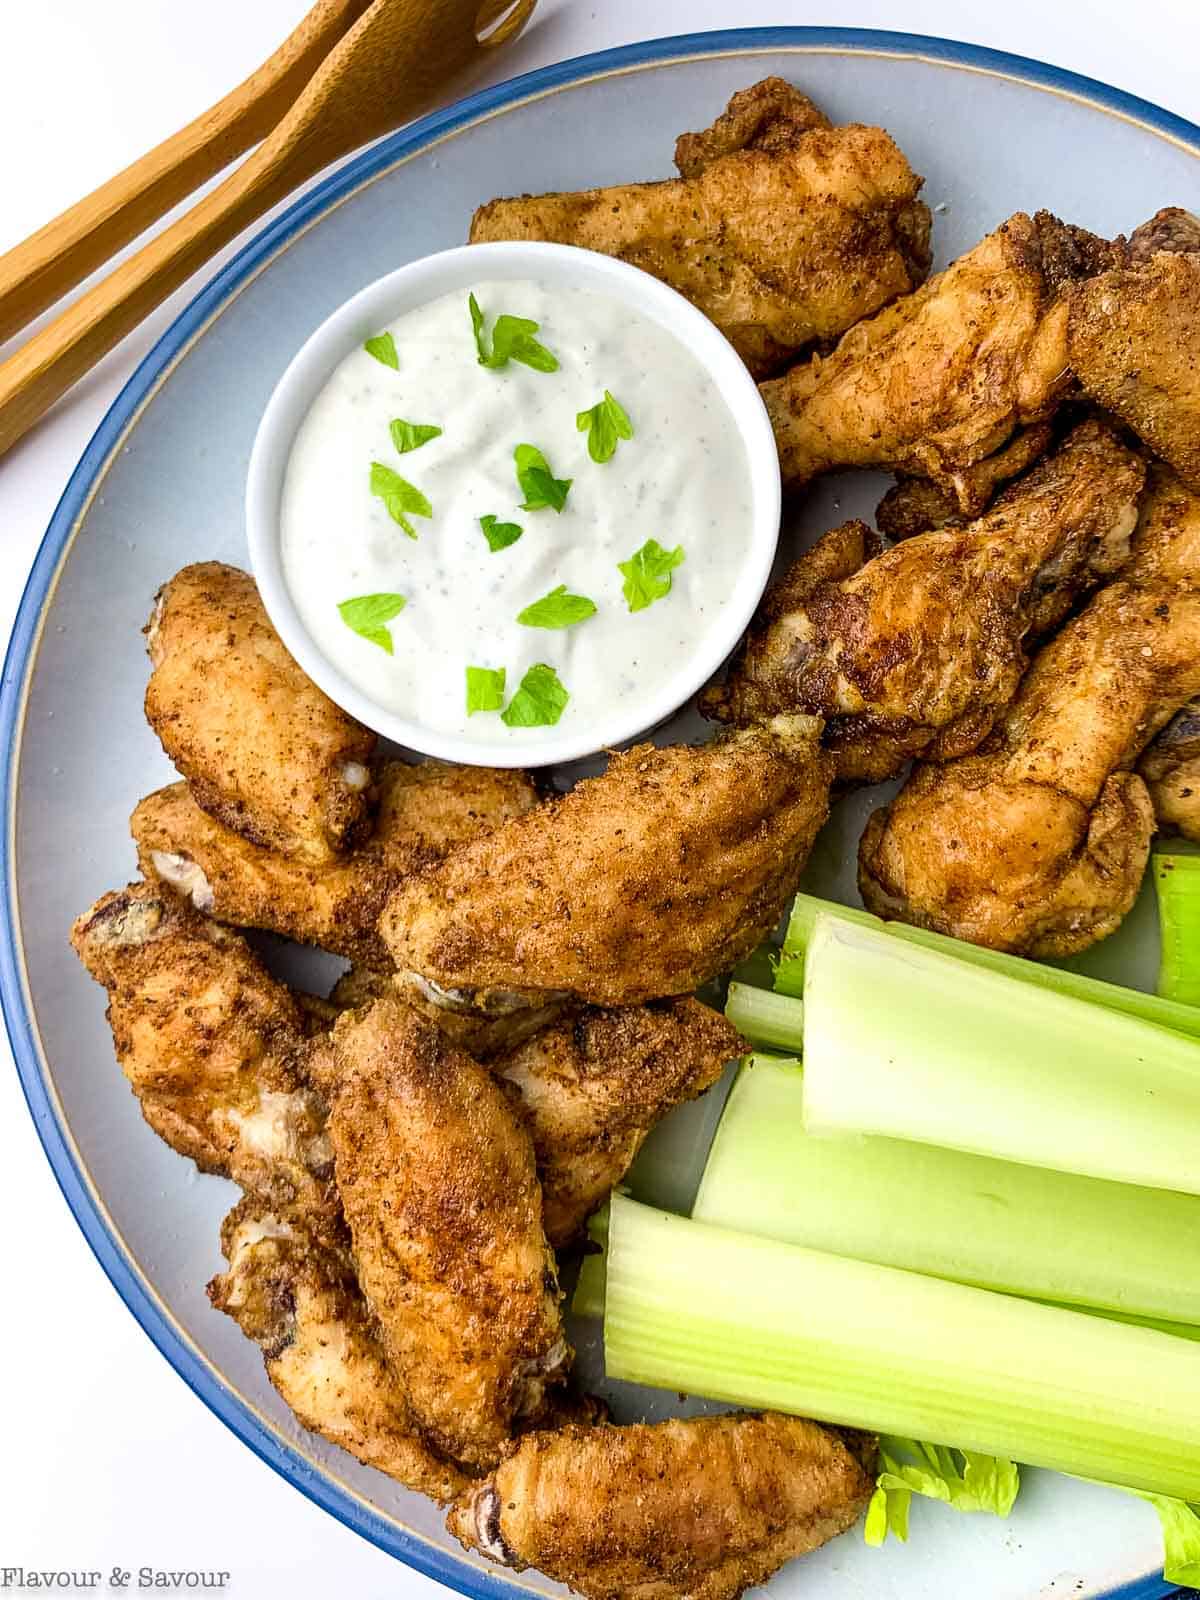 Overhead view of Old Bay chicken wings with Blue Cheese Dip.